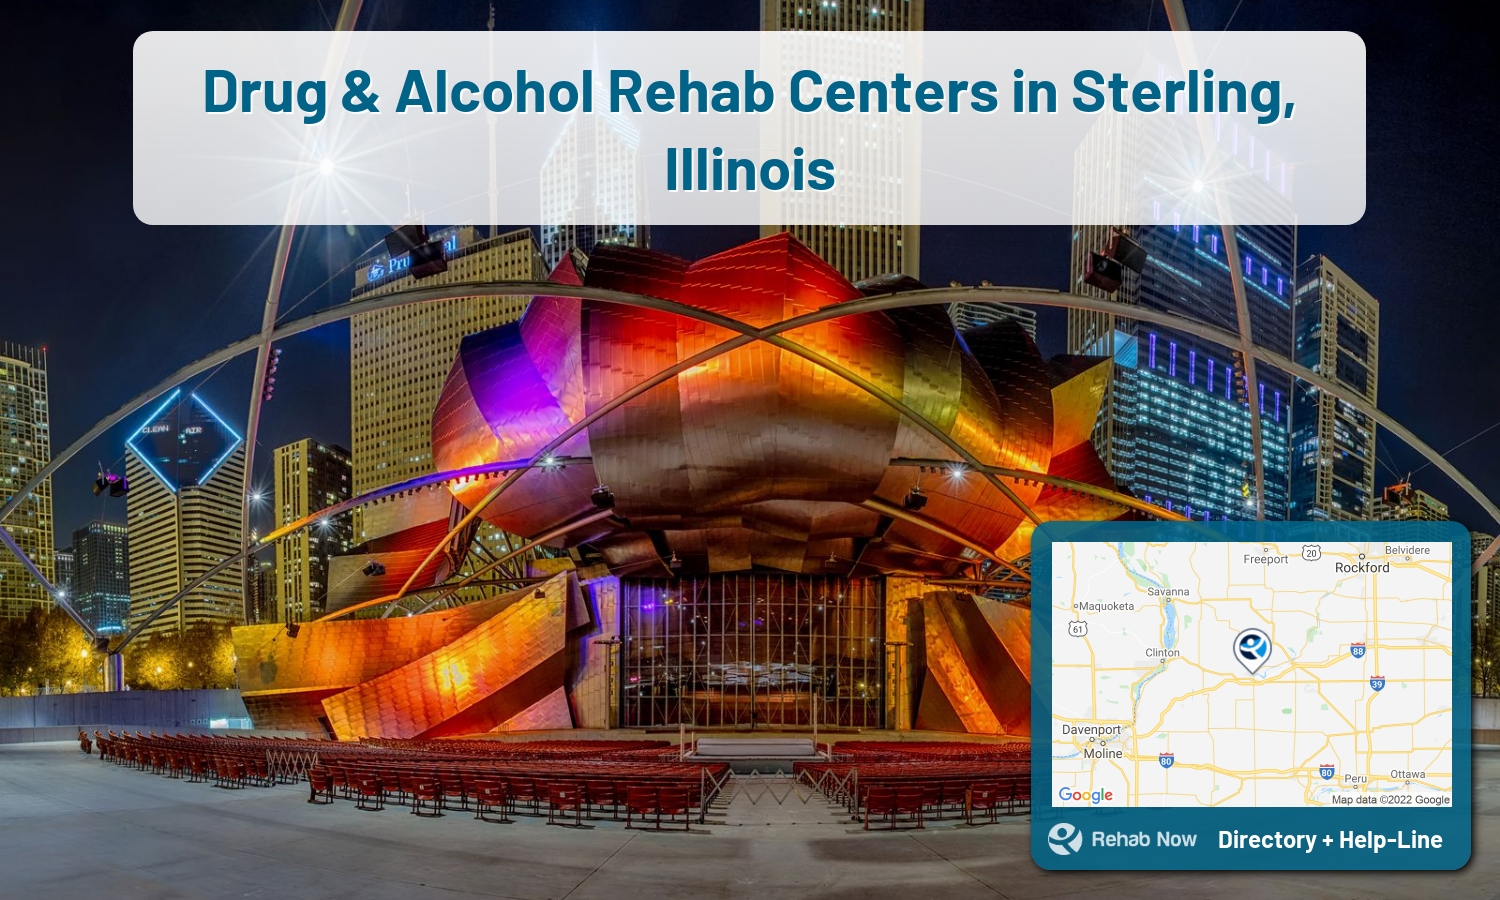 View options, availability, treatment methods, and more, for drug rehab and alcohol treatment in Sterling, Illinois